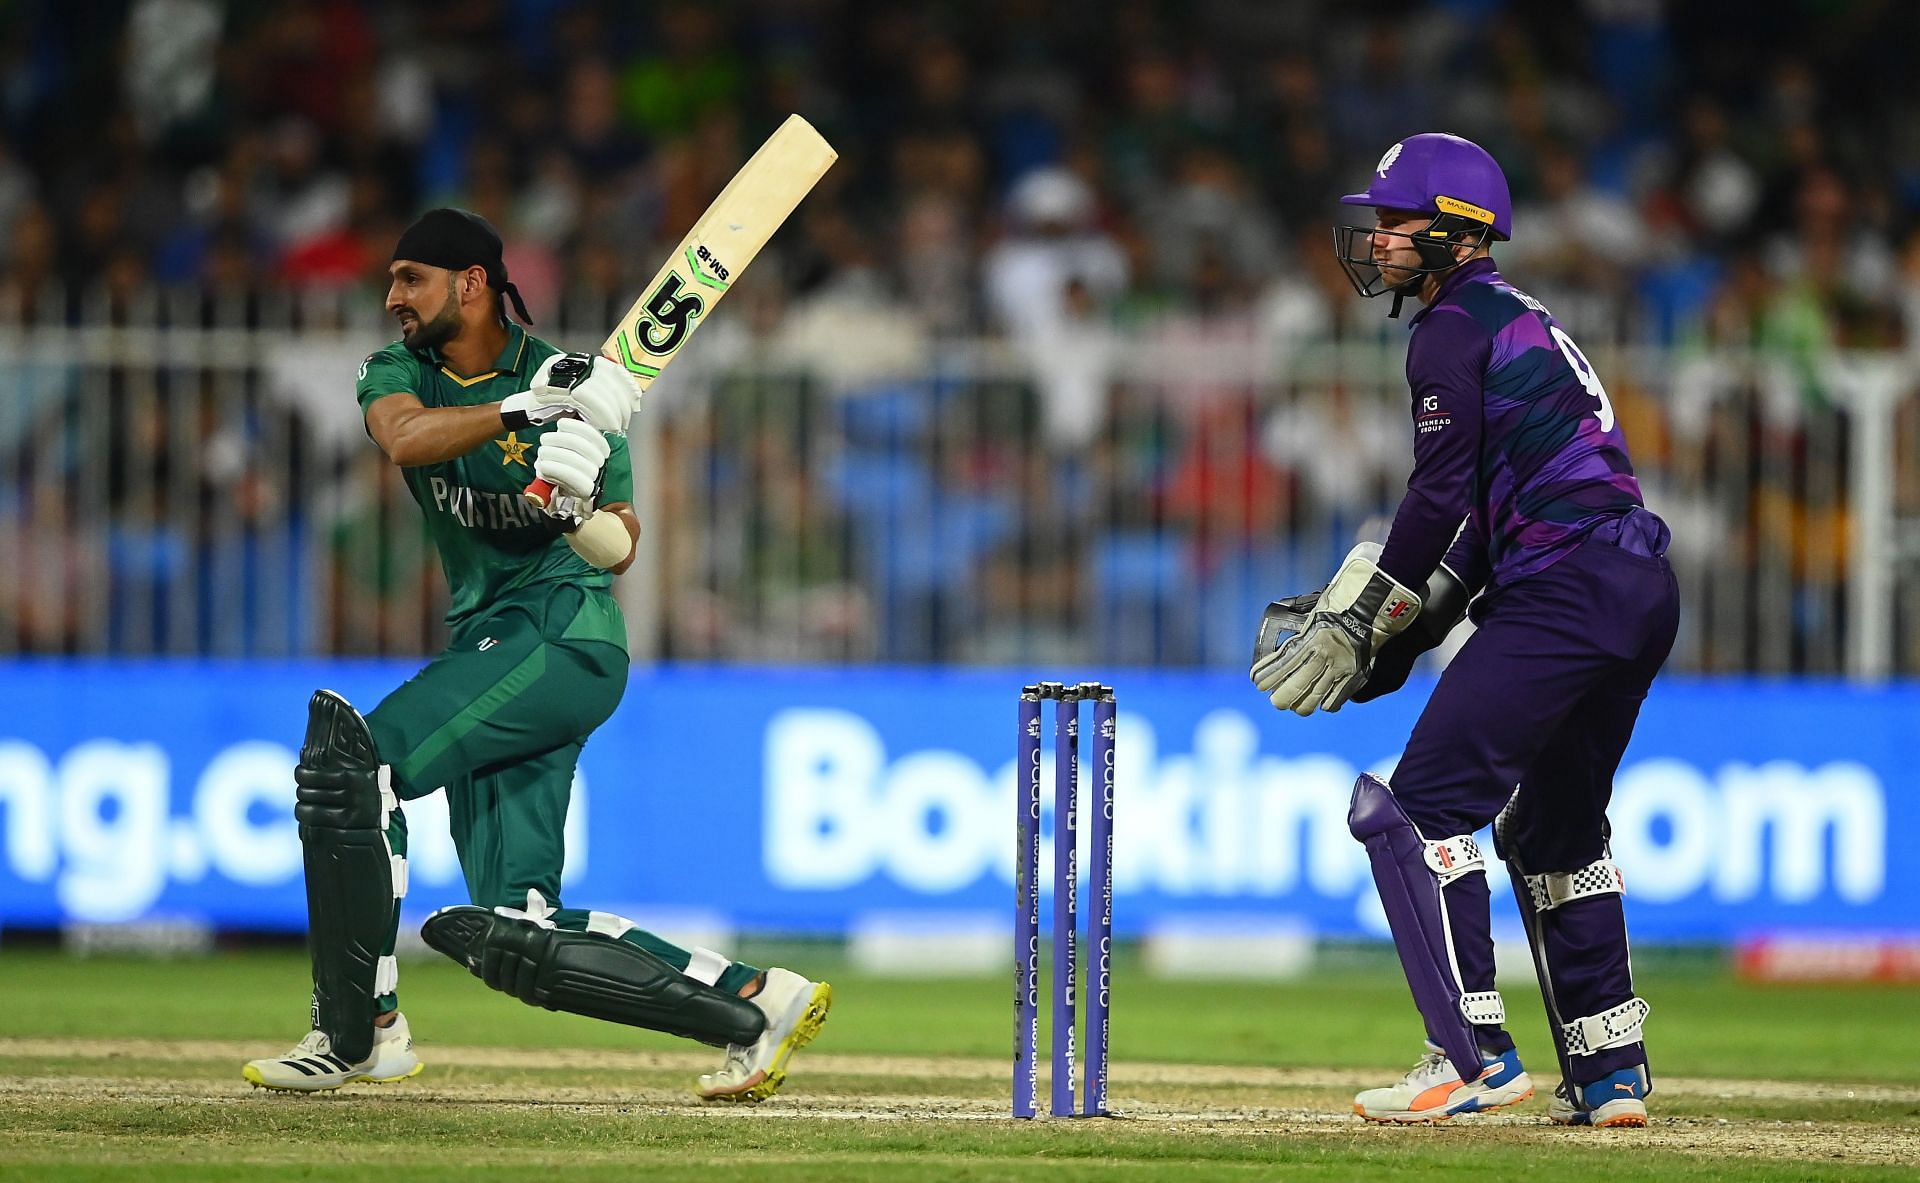 Shoaib Malik of Pakistan plays a shot in the match against Scotland. Pic: Getty Images